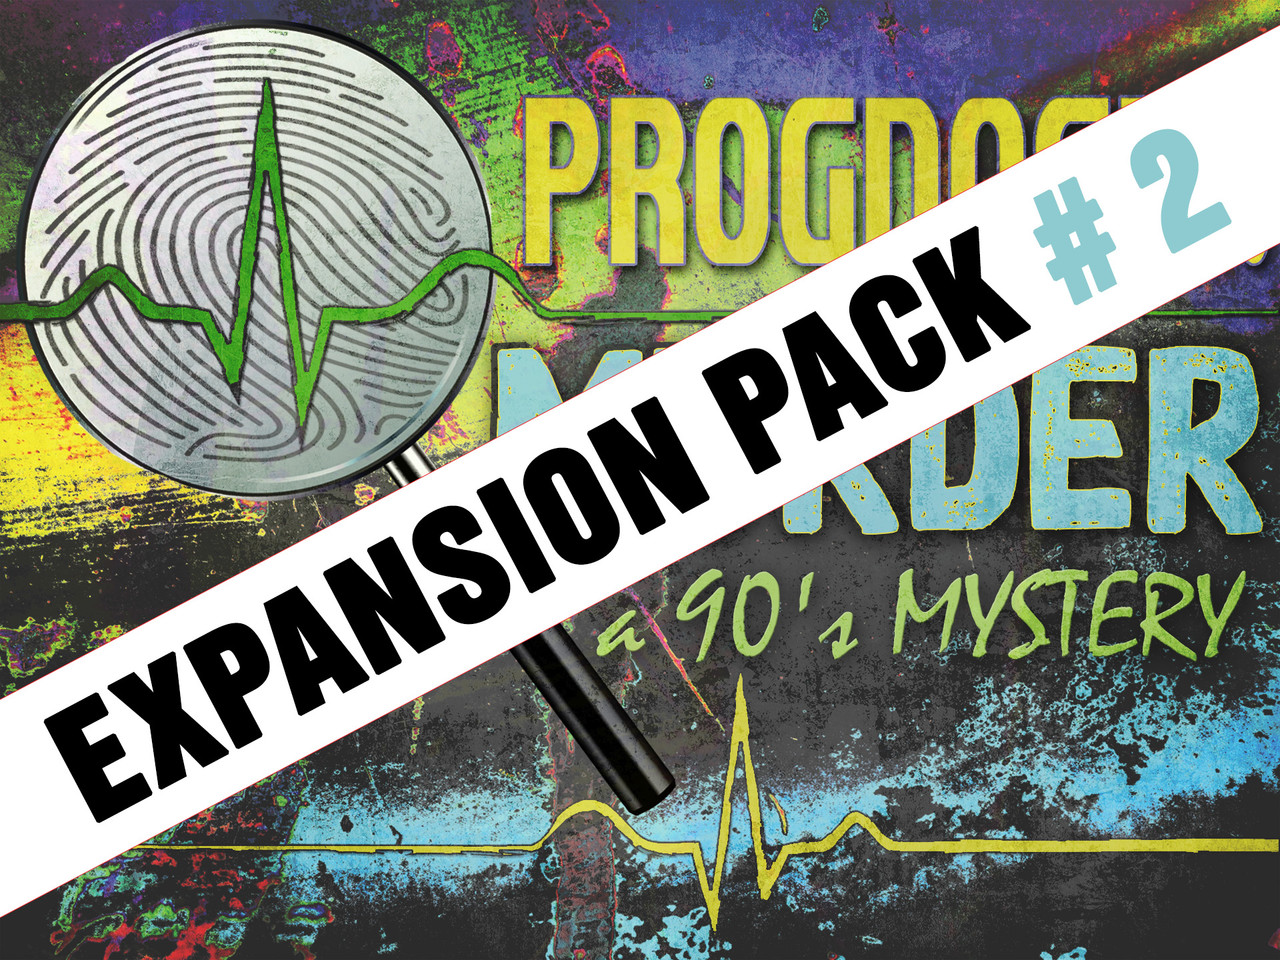 Prognosis Murder: A 90s murder mystery, Expansion pack #2